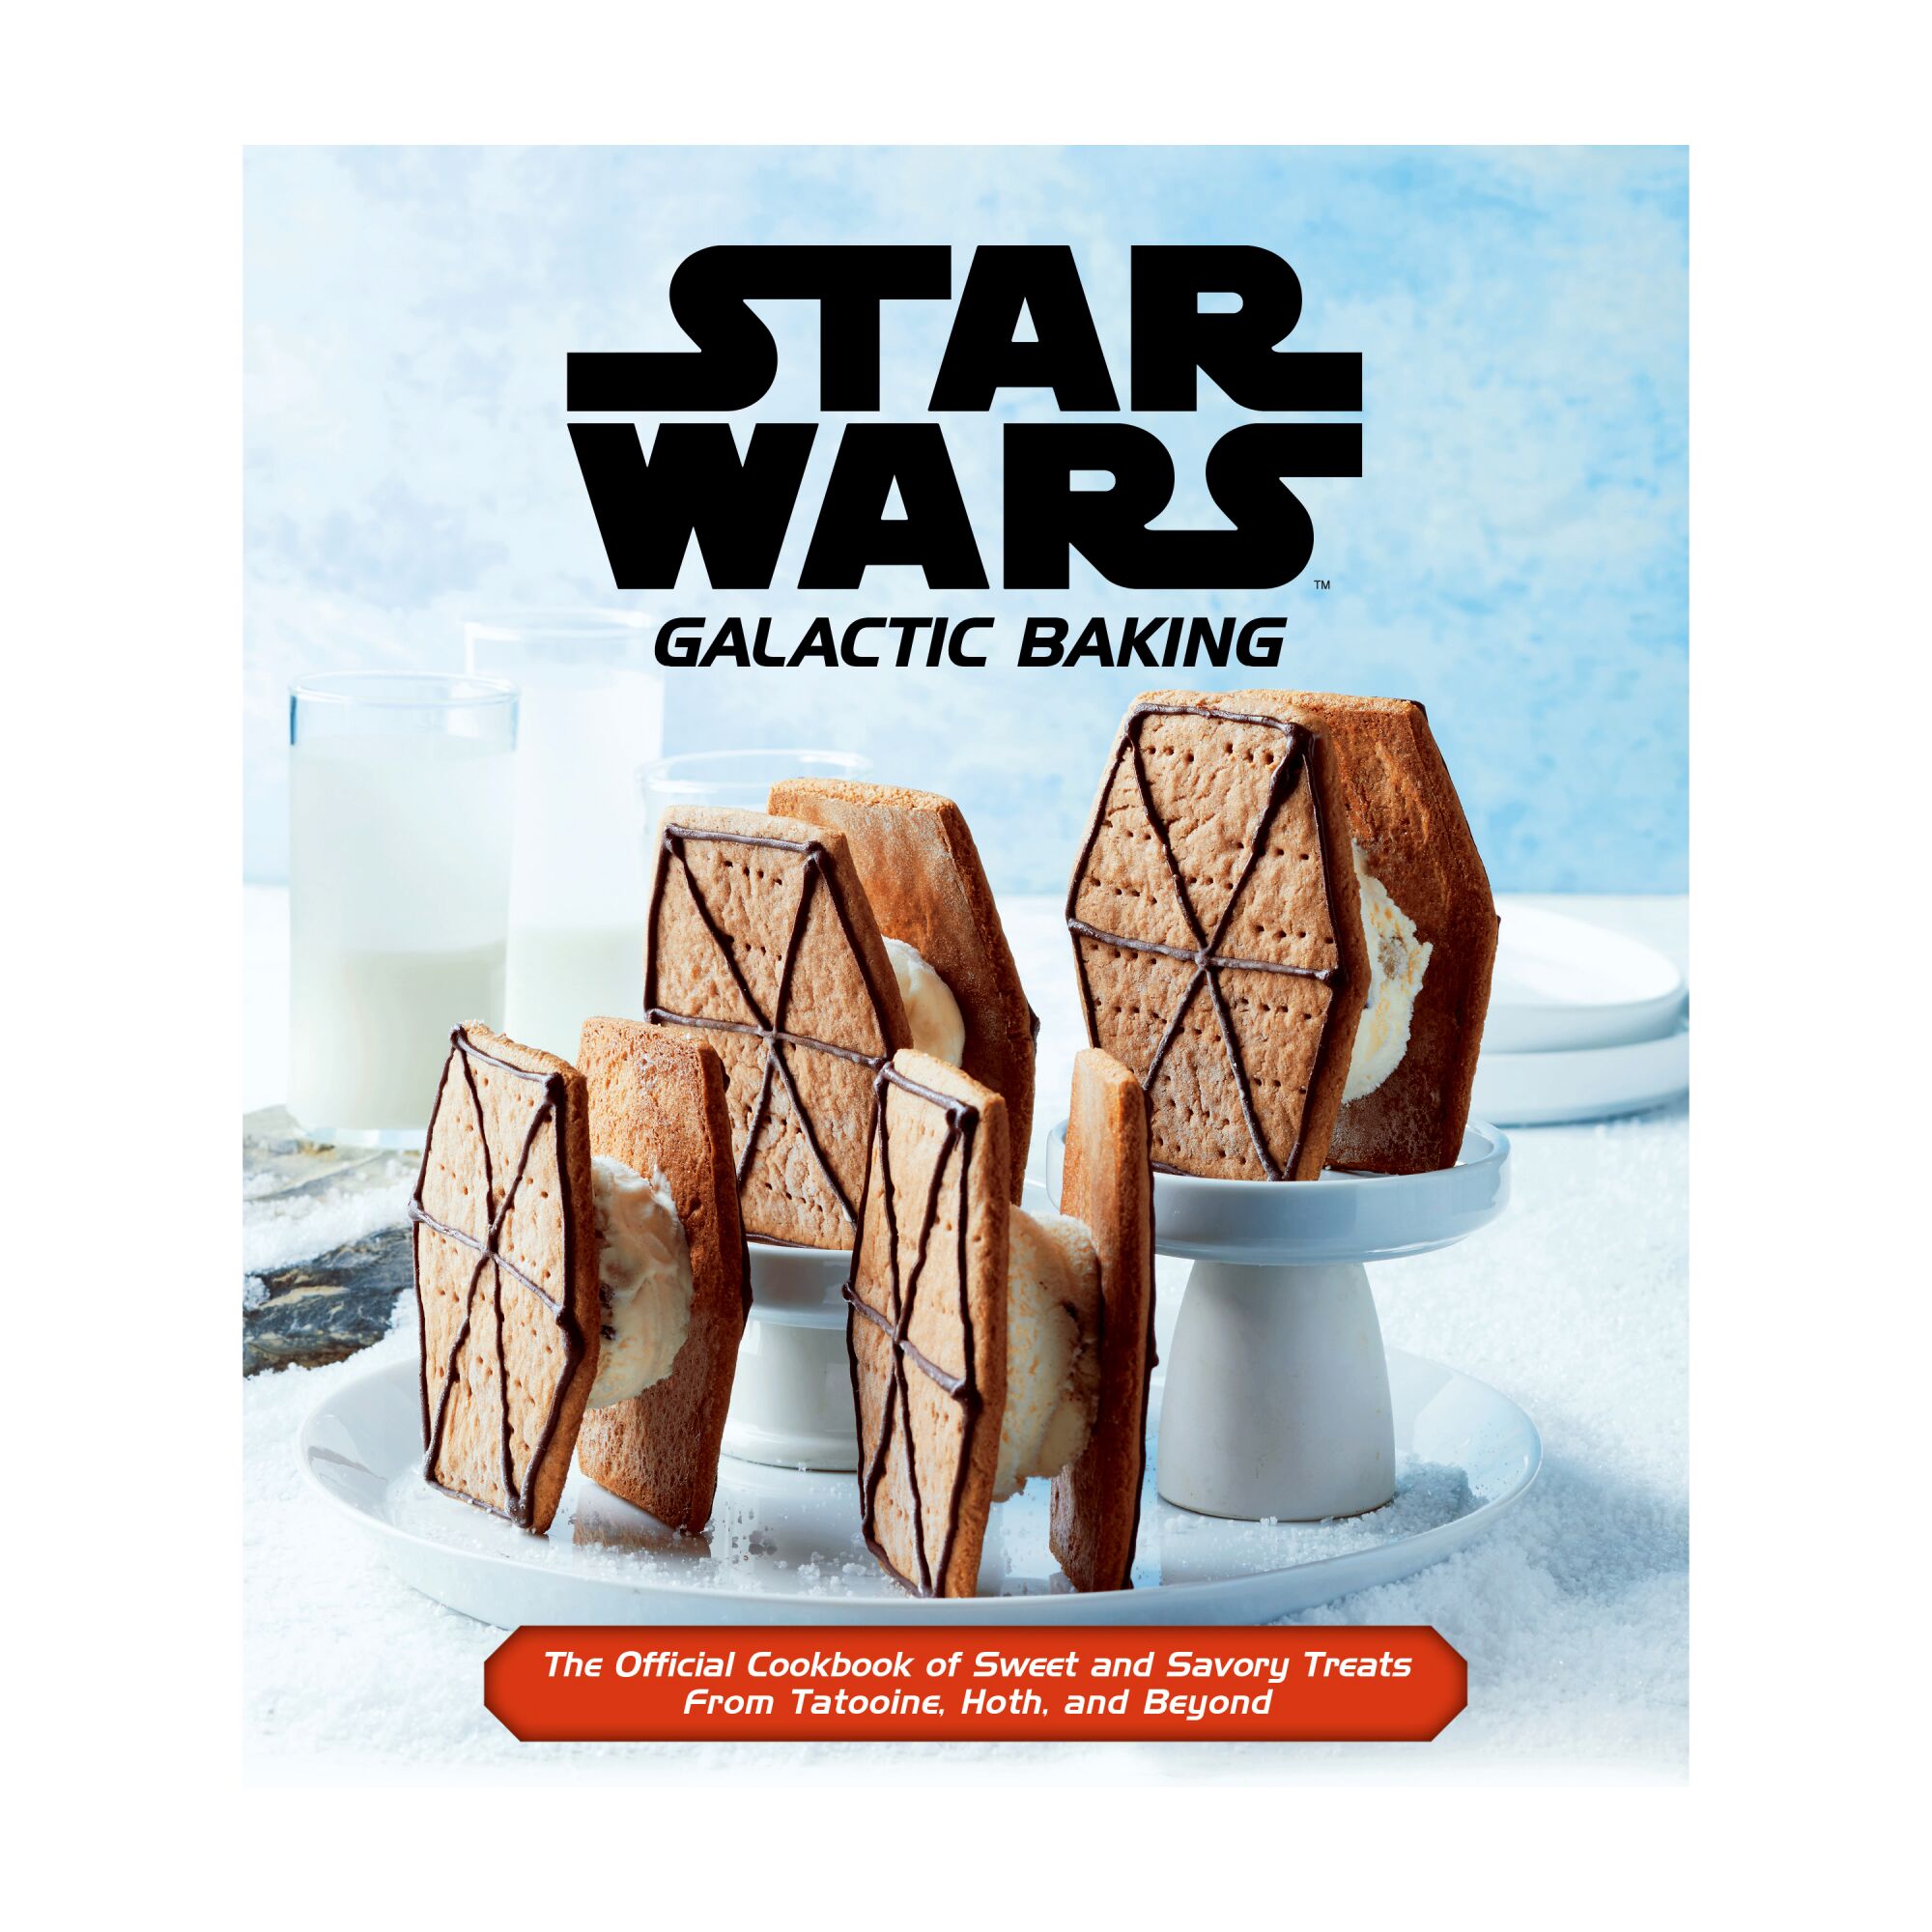 "Star Wars: Galactic Baking" cover